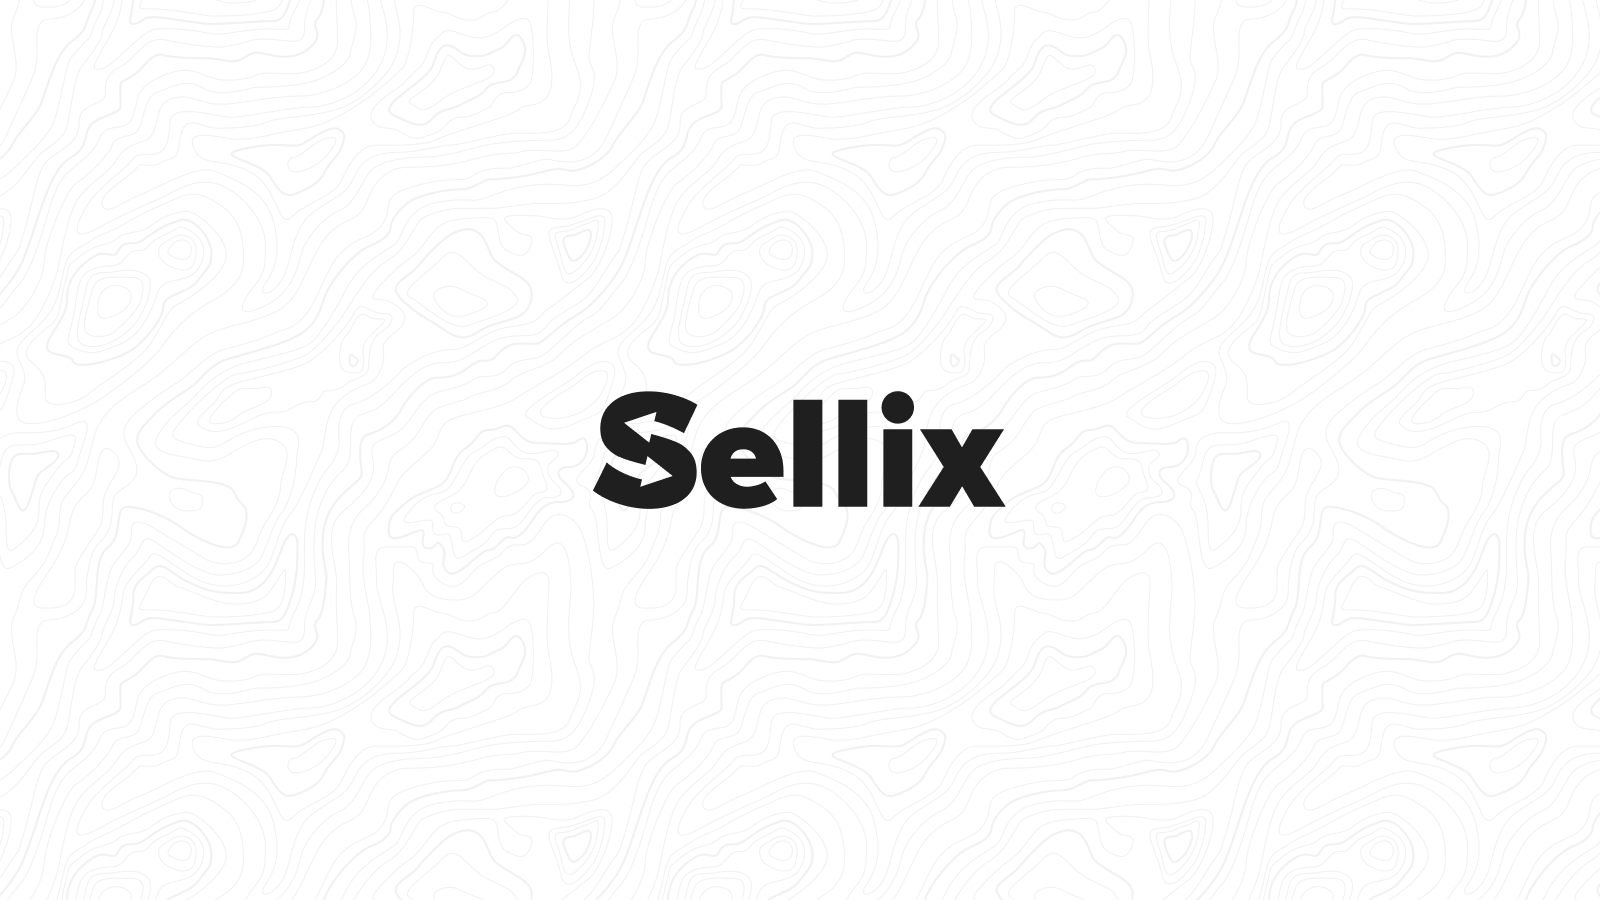 Sellix Feature Drop — July